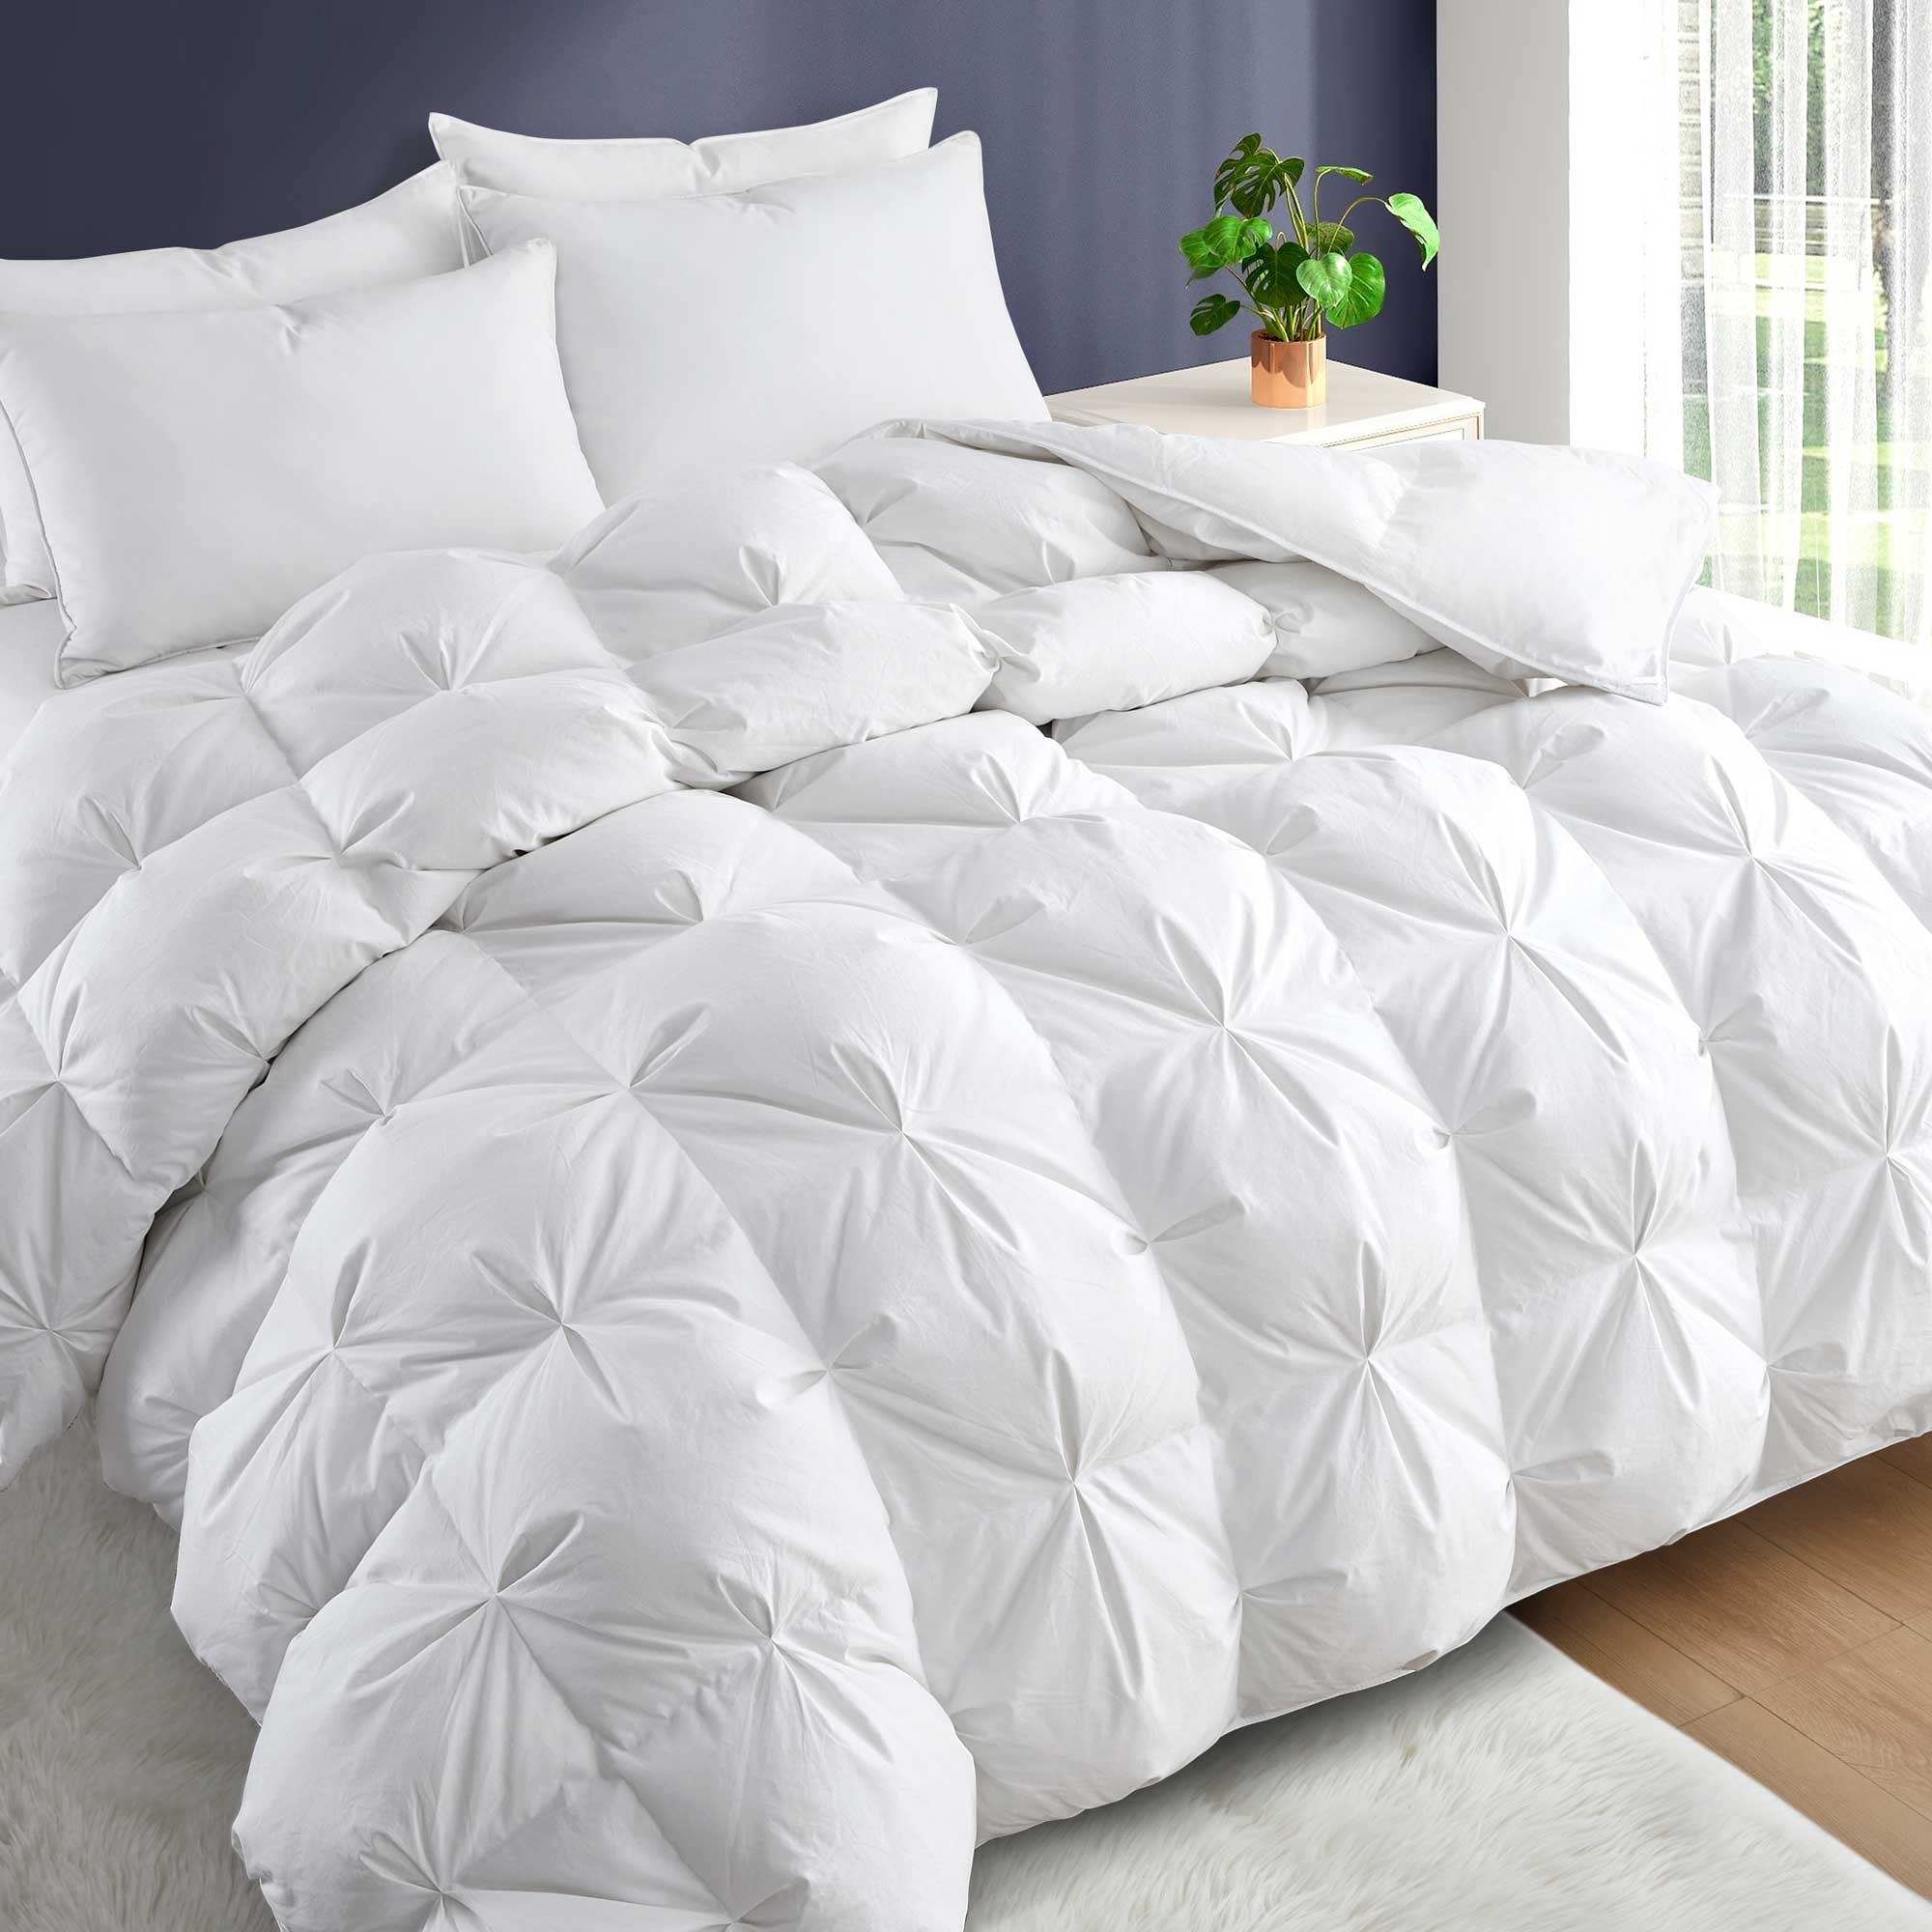 Luxury 800 Fill Power White Goose Down Winter Comforter-Extra Warm Super Soft Heavy Weight Comforter - White, Twin